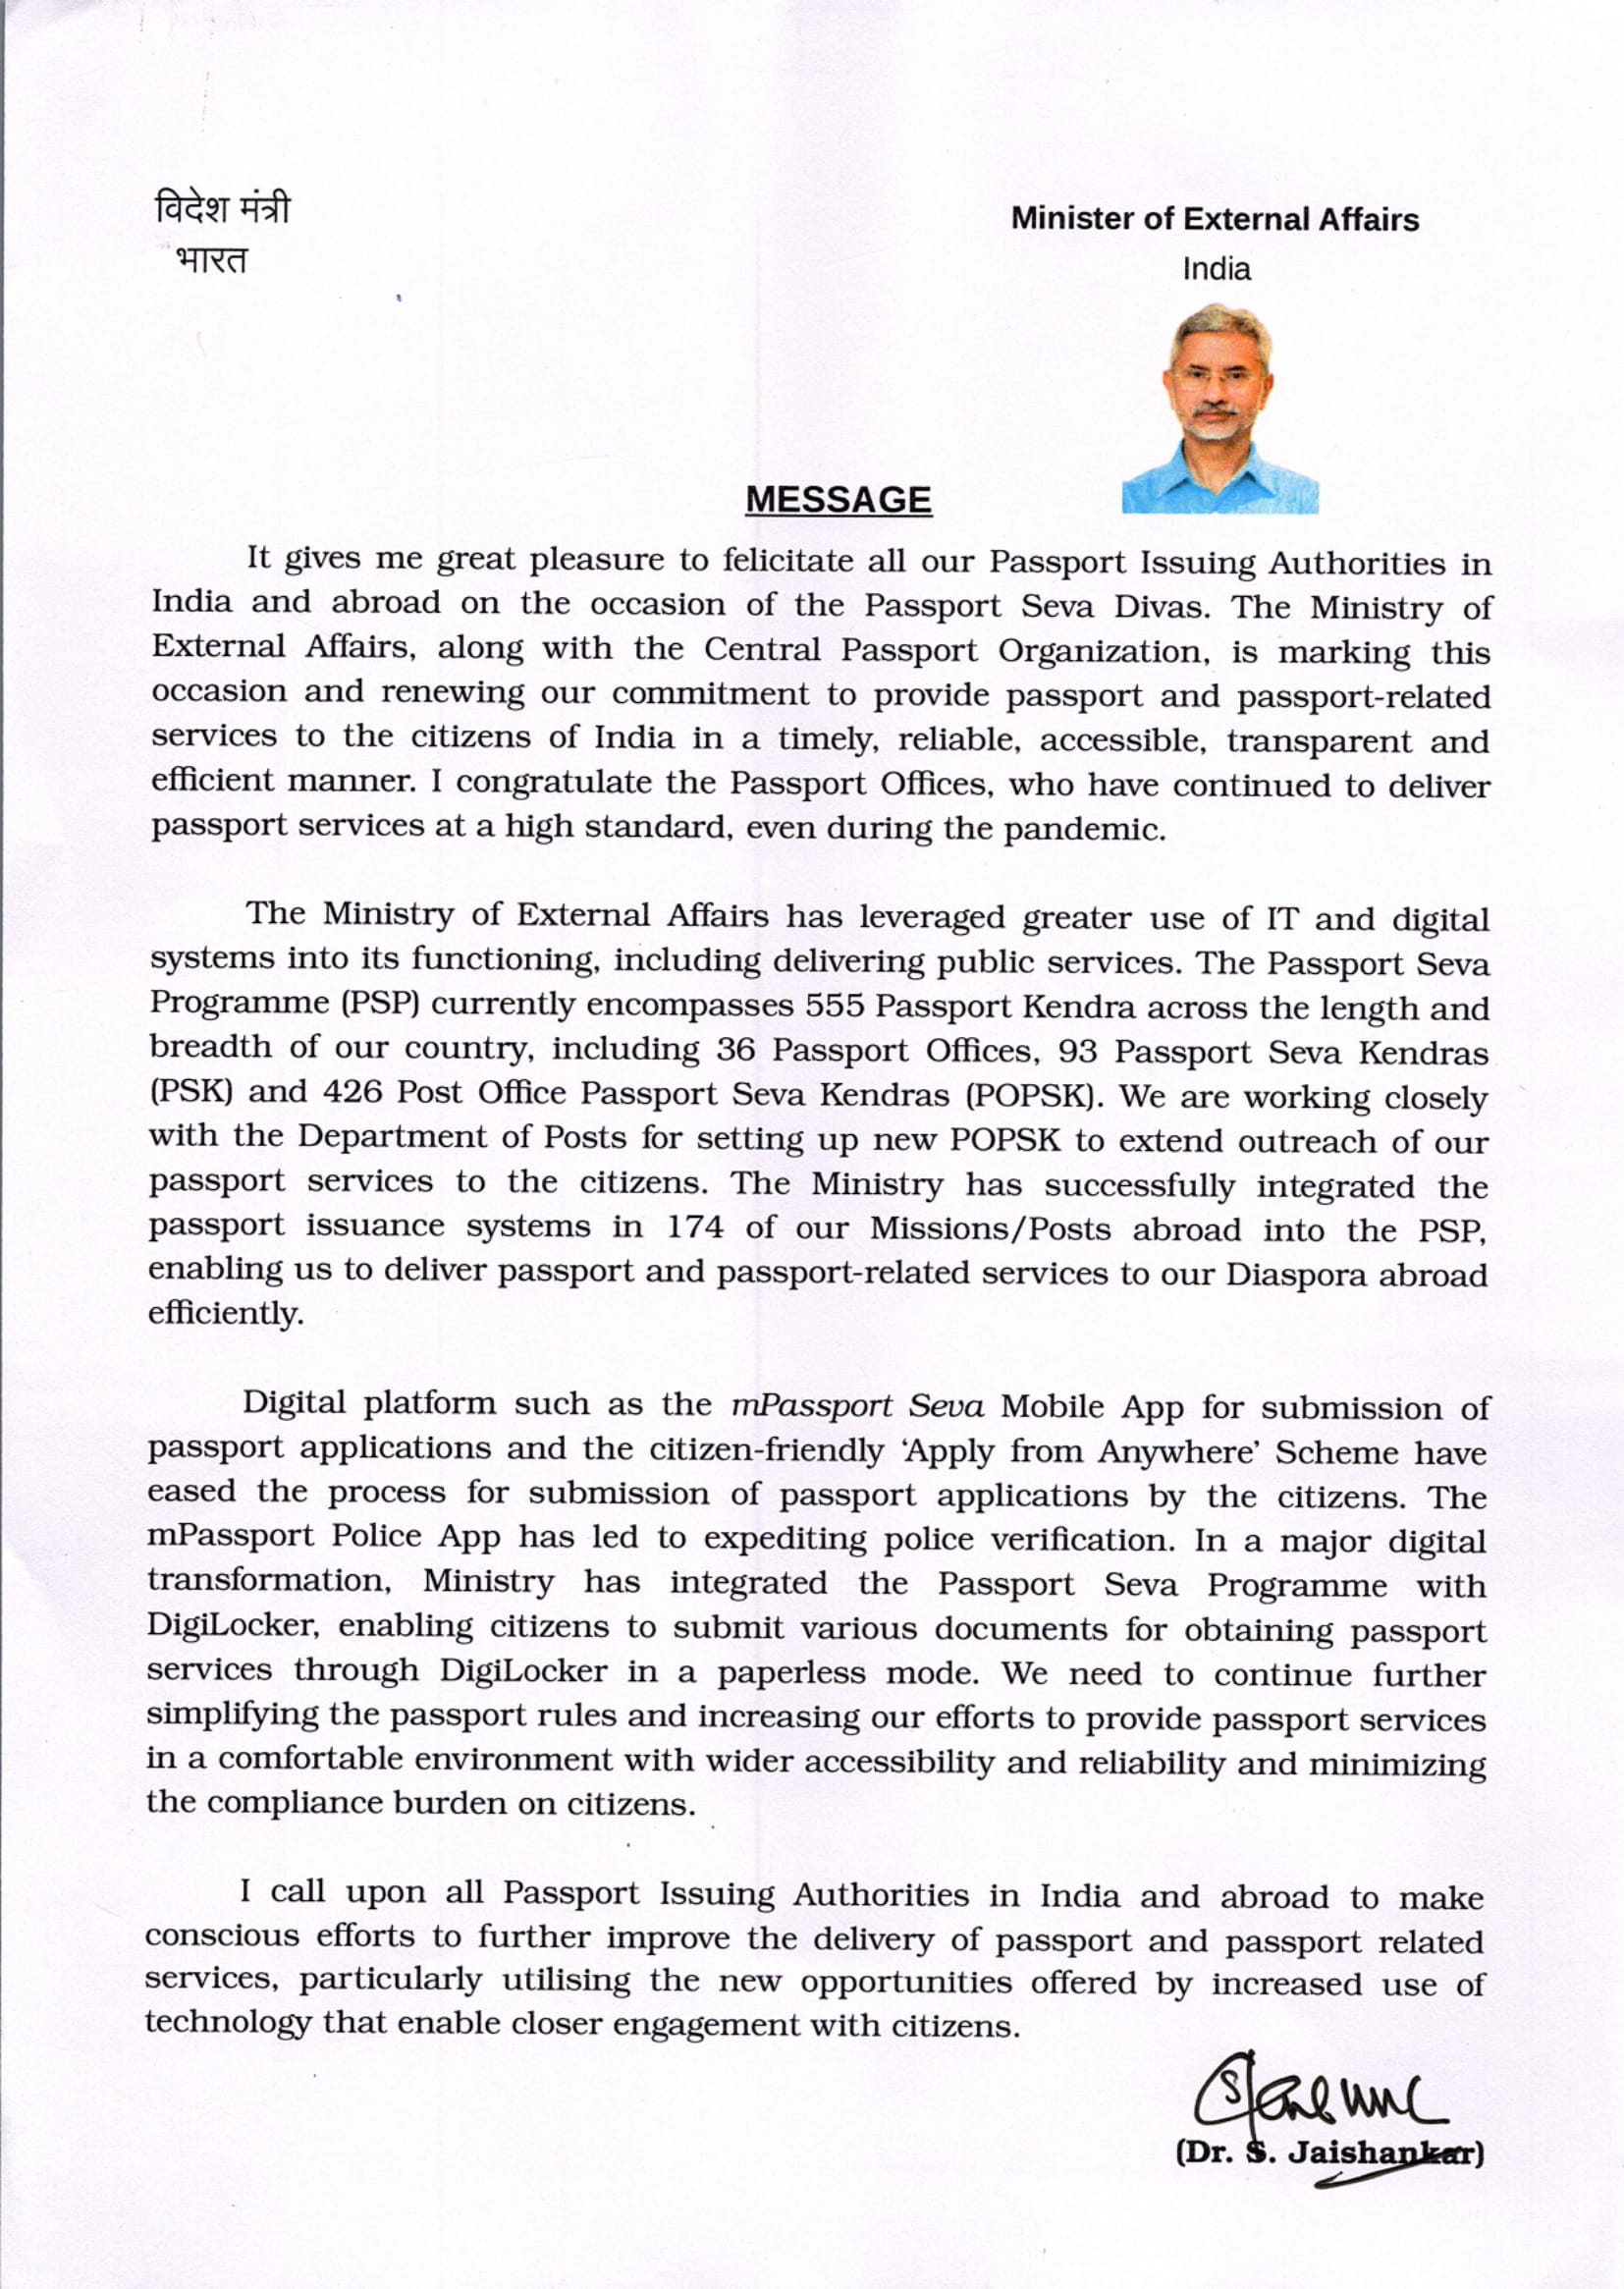 Message from External Affairs Minister on the occasion of Passport Seva Divas